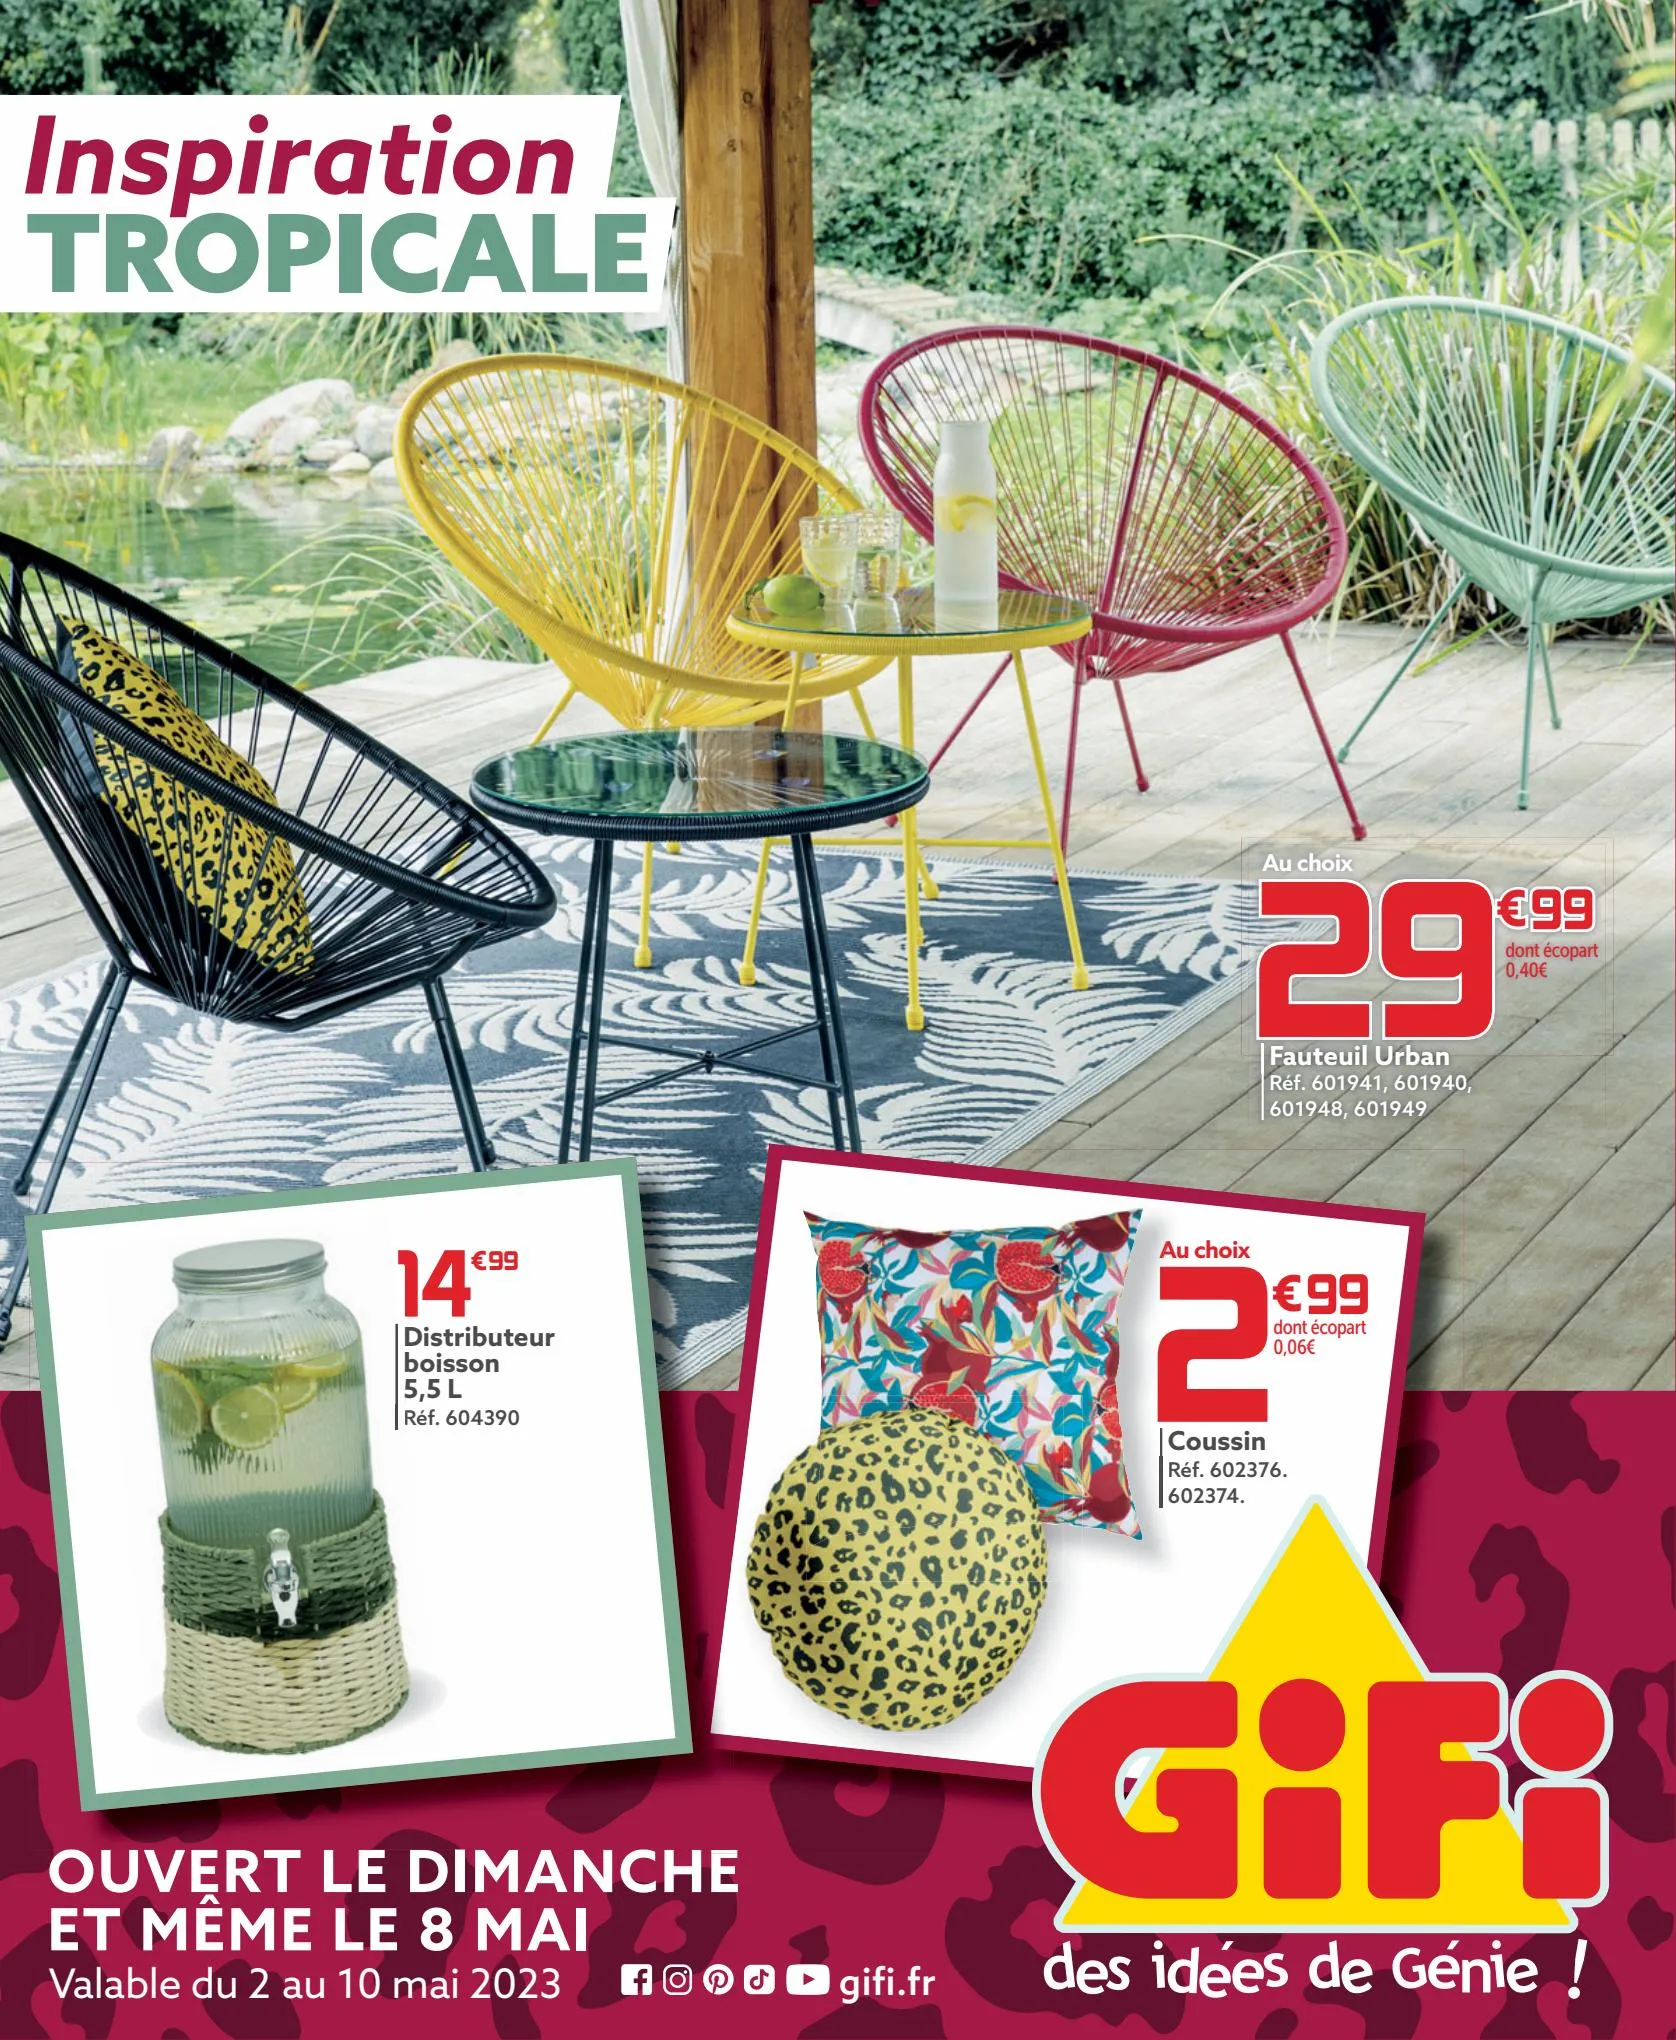 Catalogue Inspiration Tropicale, page 00001